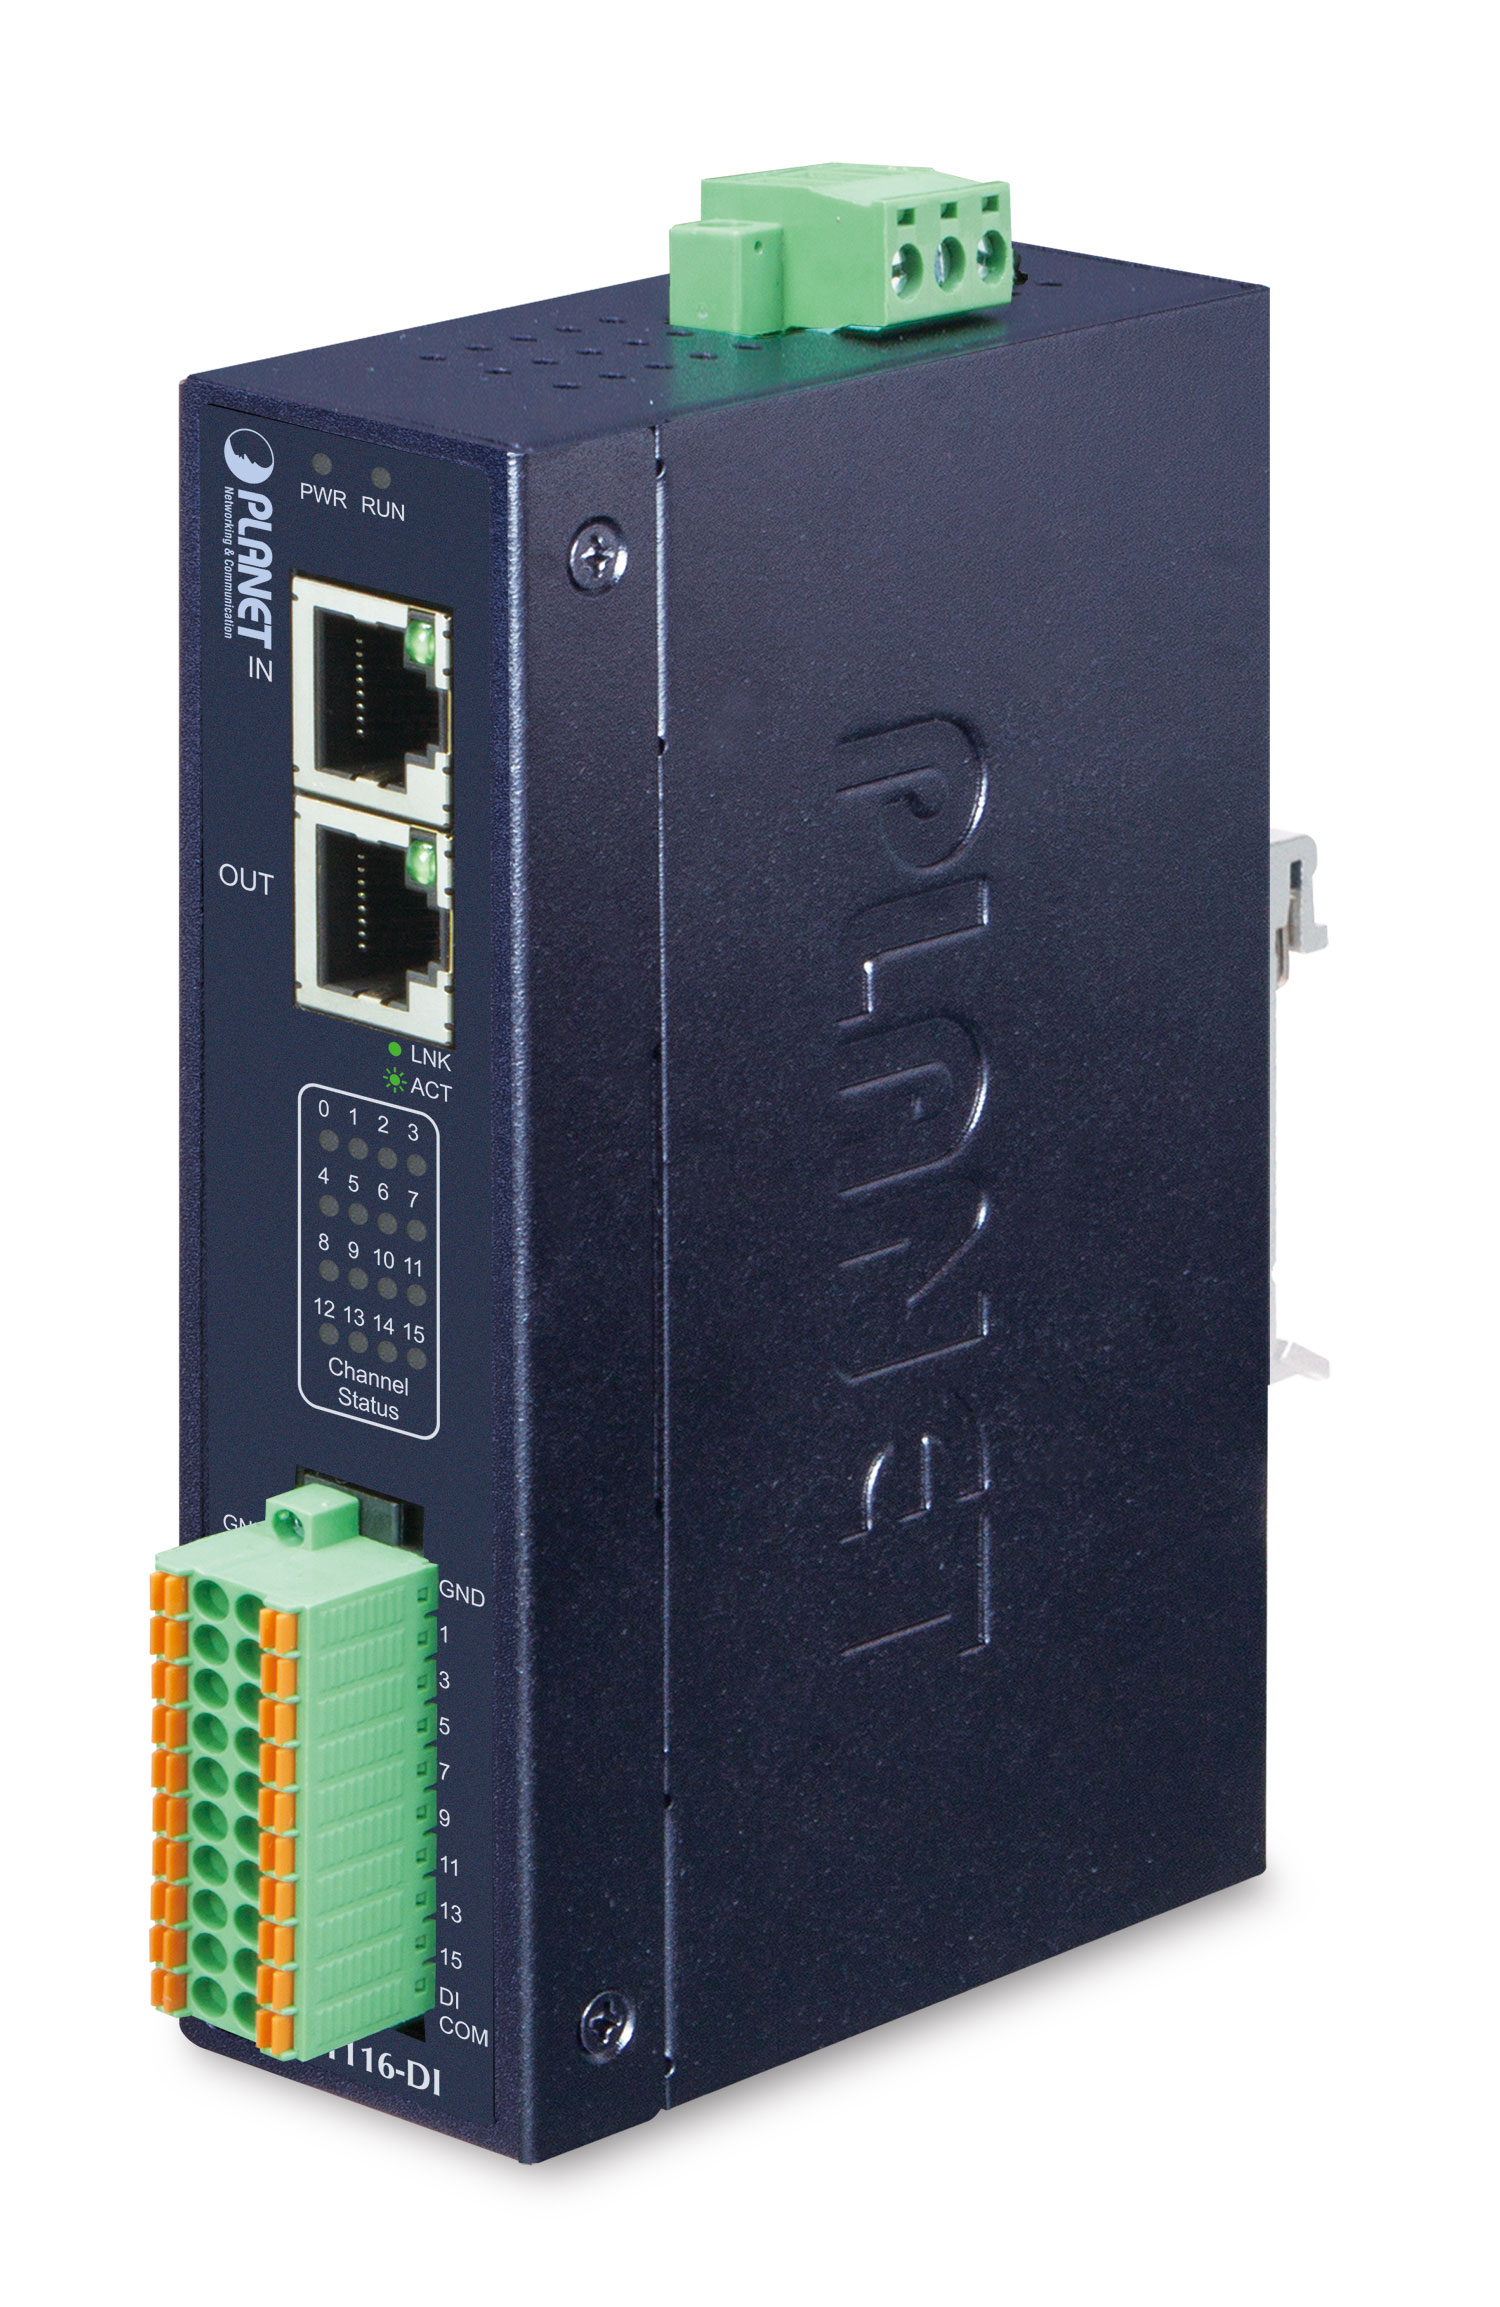 【IECS-1116DI】Industrial EtherCAT Slave I/O Module with Isolated 16-ch Digital Input
